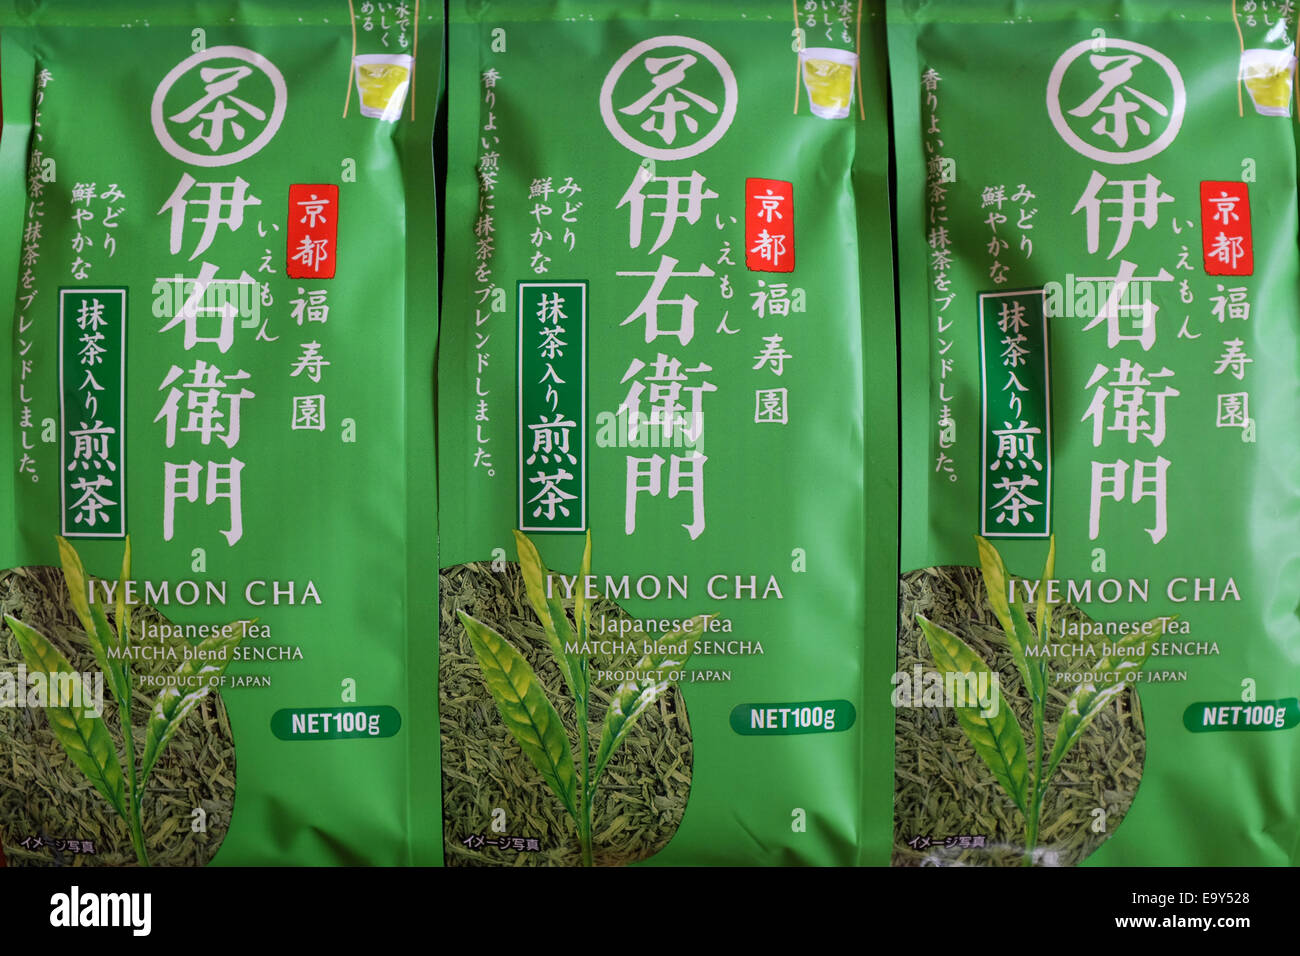 Packets of Japanese green tea. Stock Photo